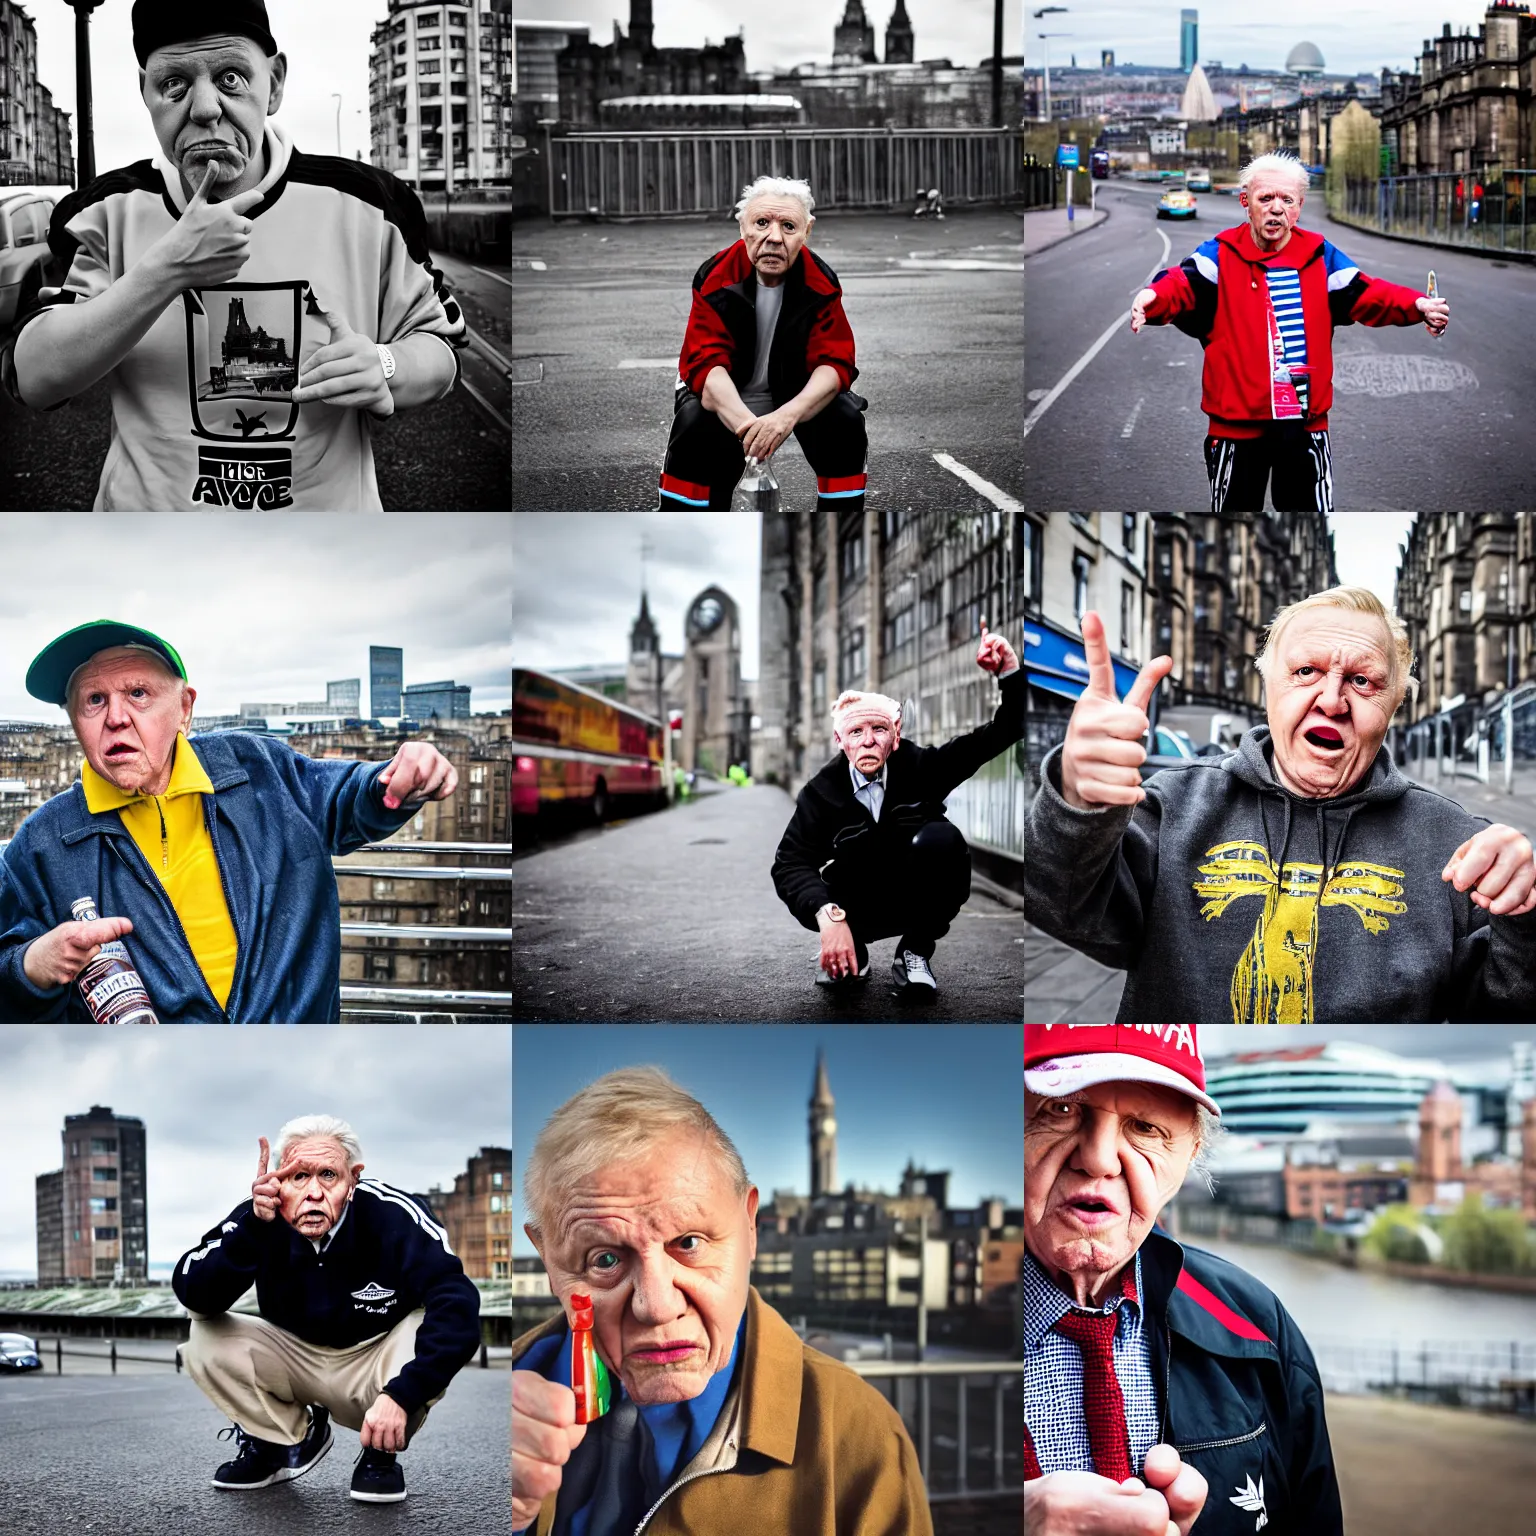 Prompt: cav david attenborough dressed as a chav, addidas, caps sideways, vodka, giving the middle finger, squatting, award winning photograph, street photo, glasgow in background, detailed face, portrait, facial features, 5 5 mm, f / 4, zeiss, interview